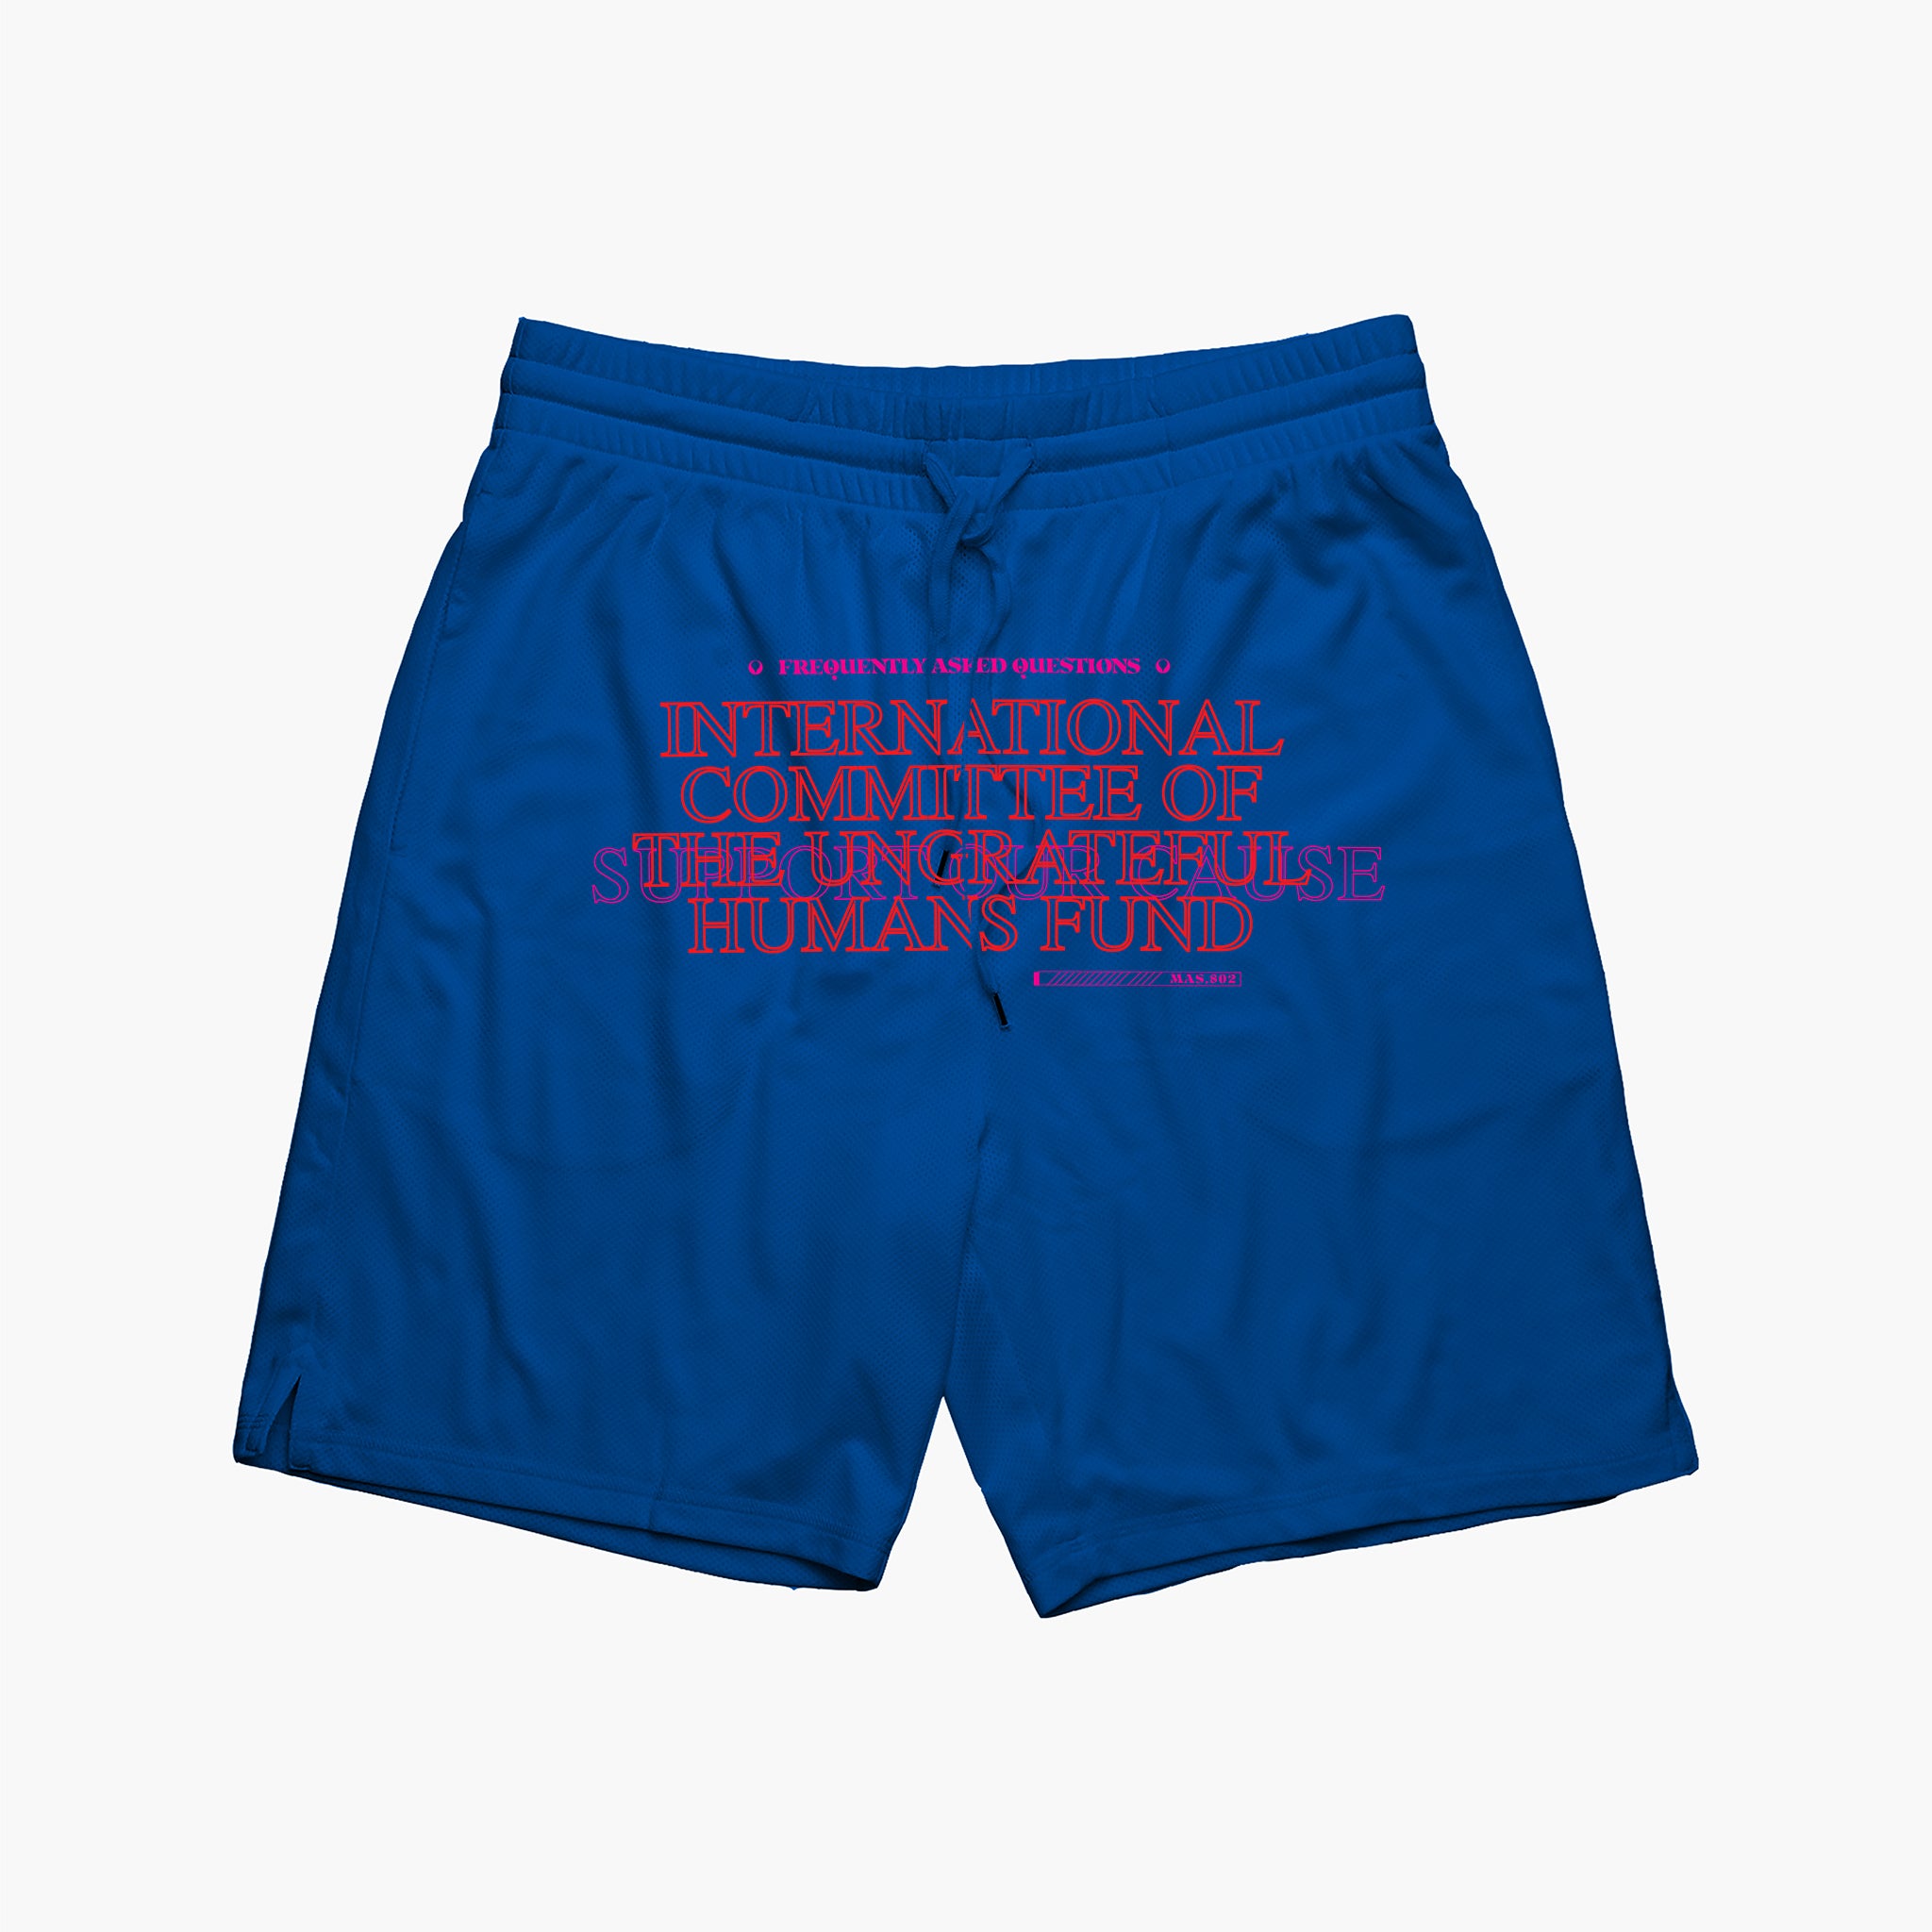 UHF Stadium Shorts - Frequently Asked Questions